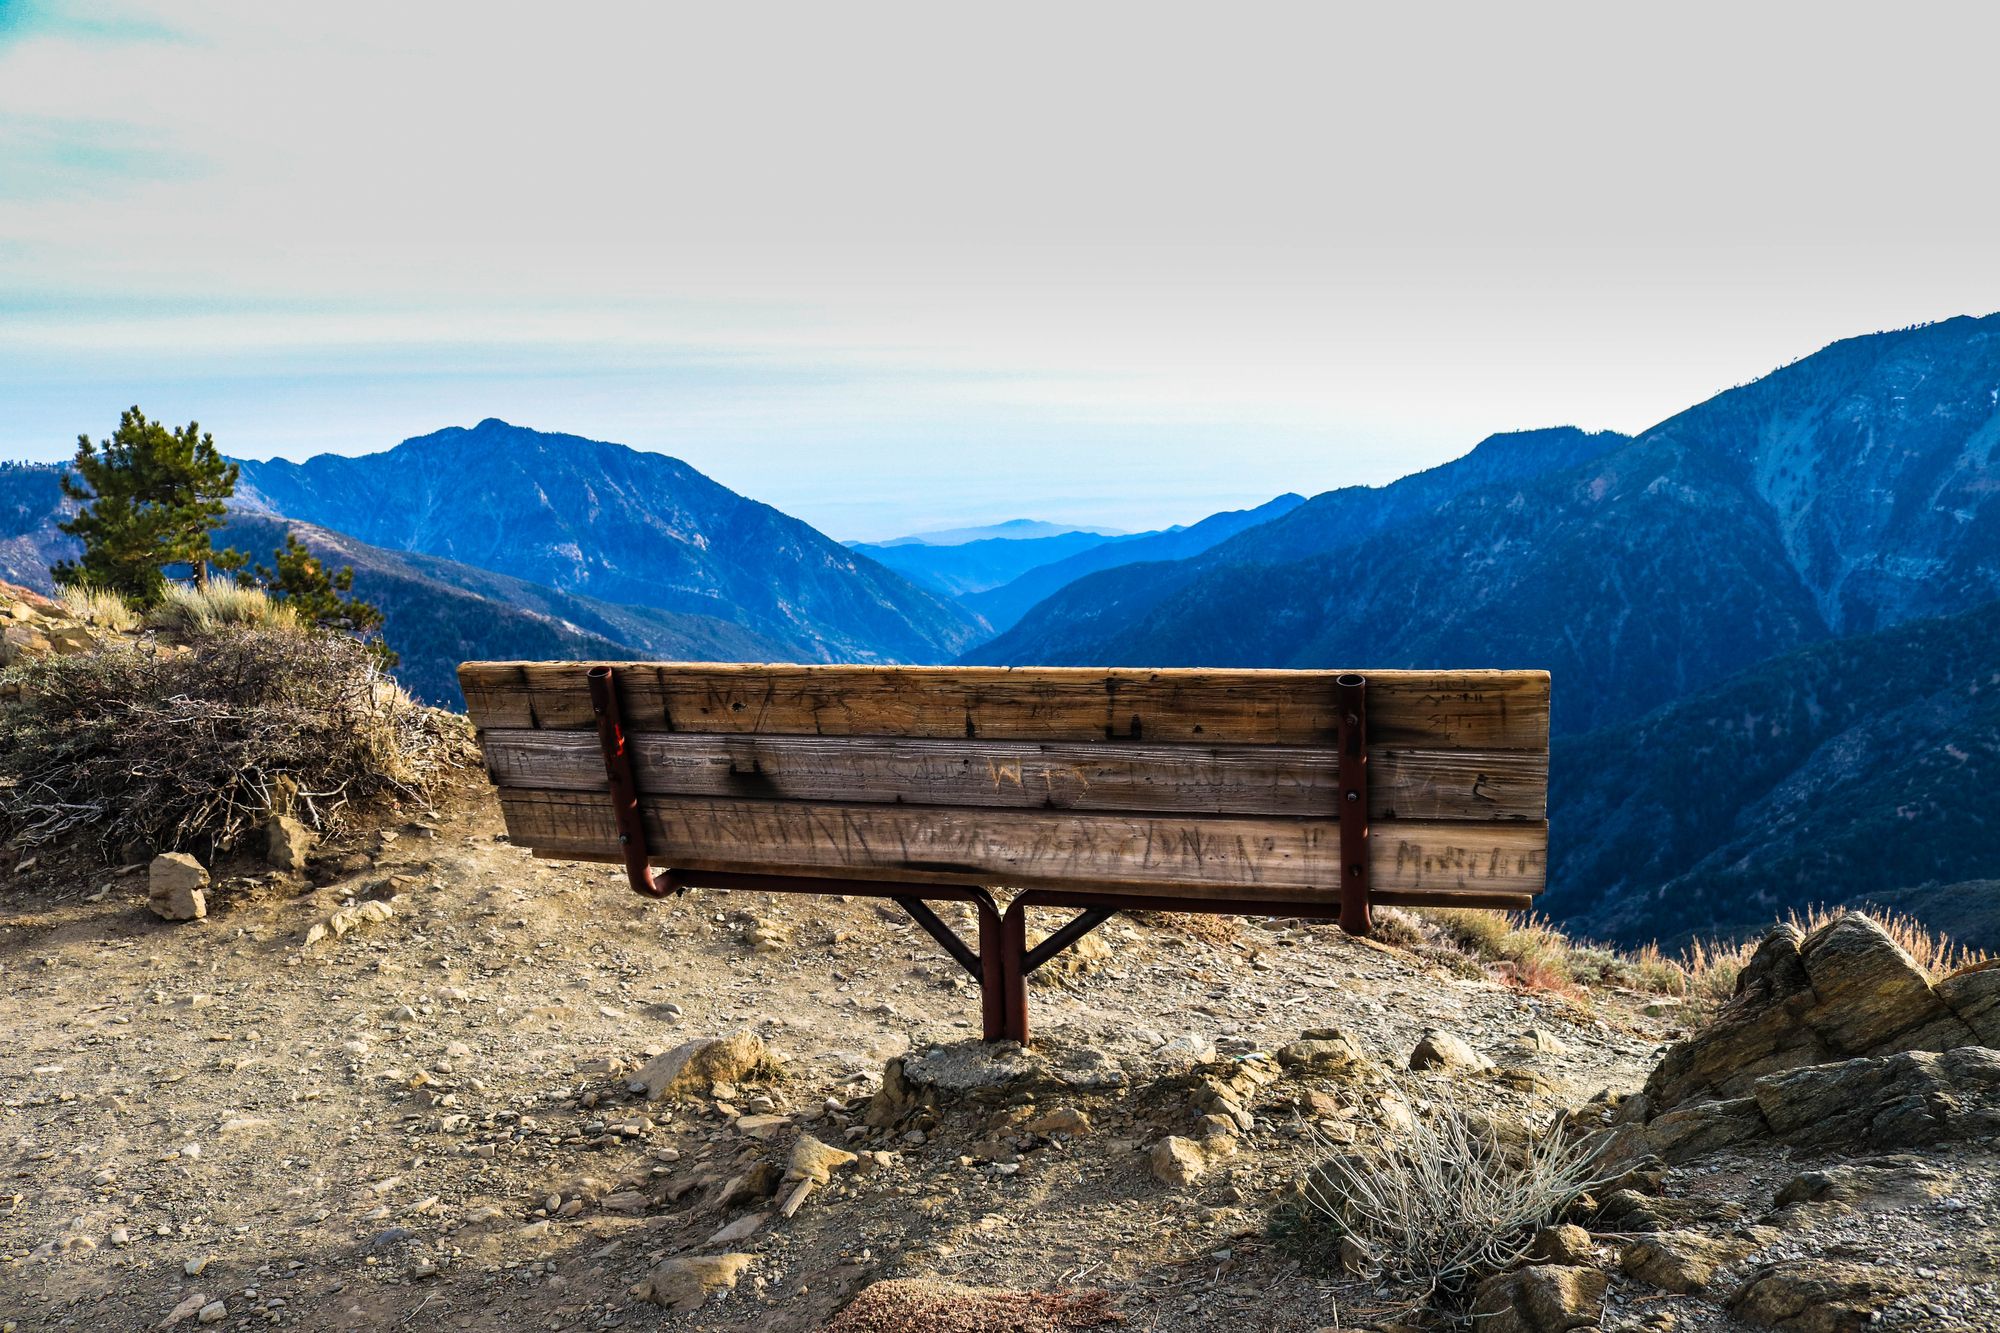 Top 3 Local Spots in Wrightwood